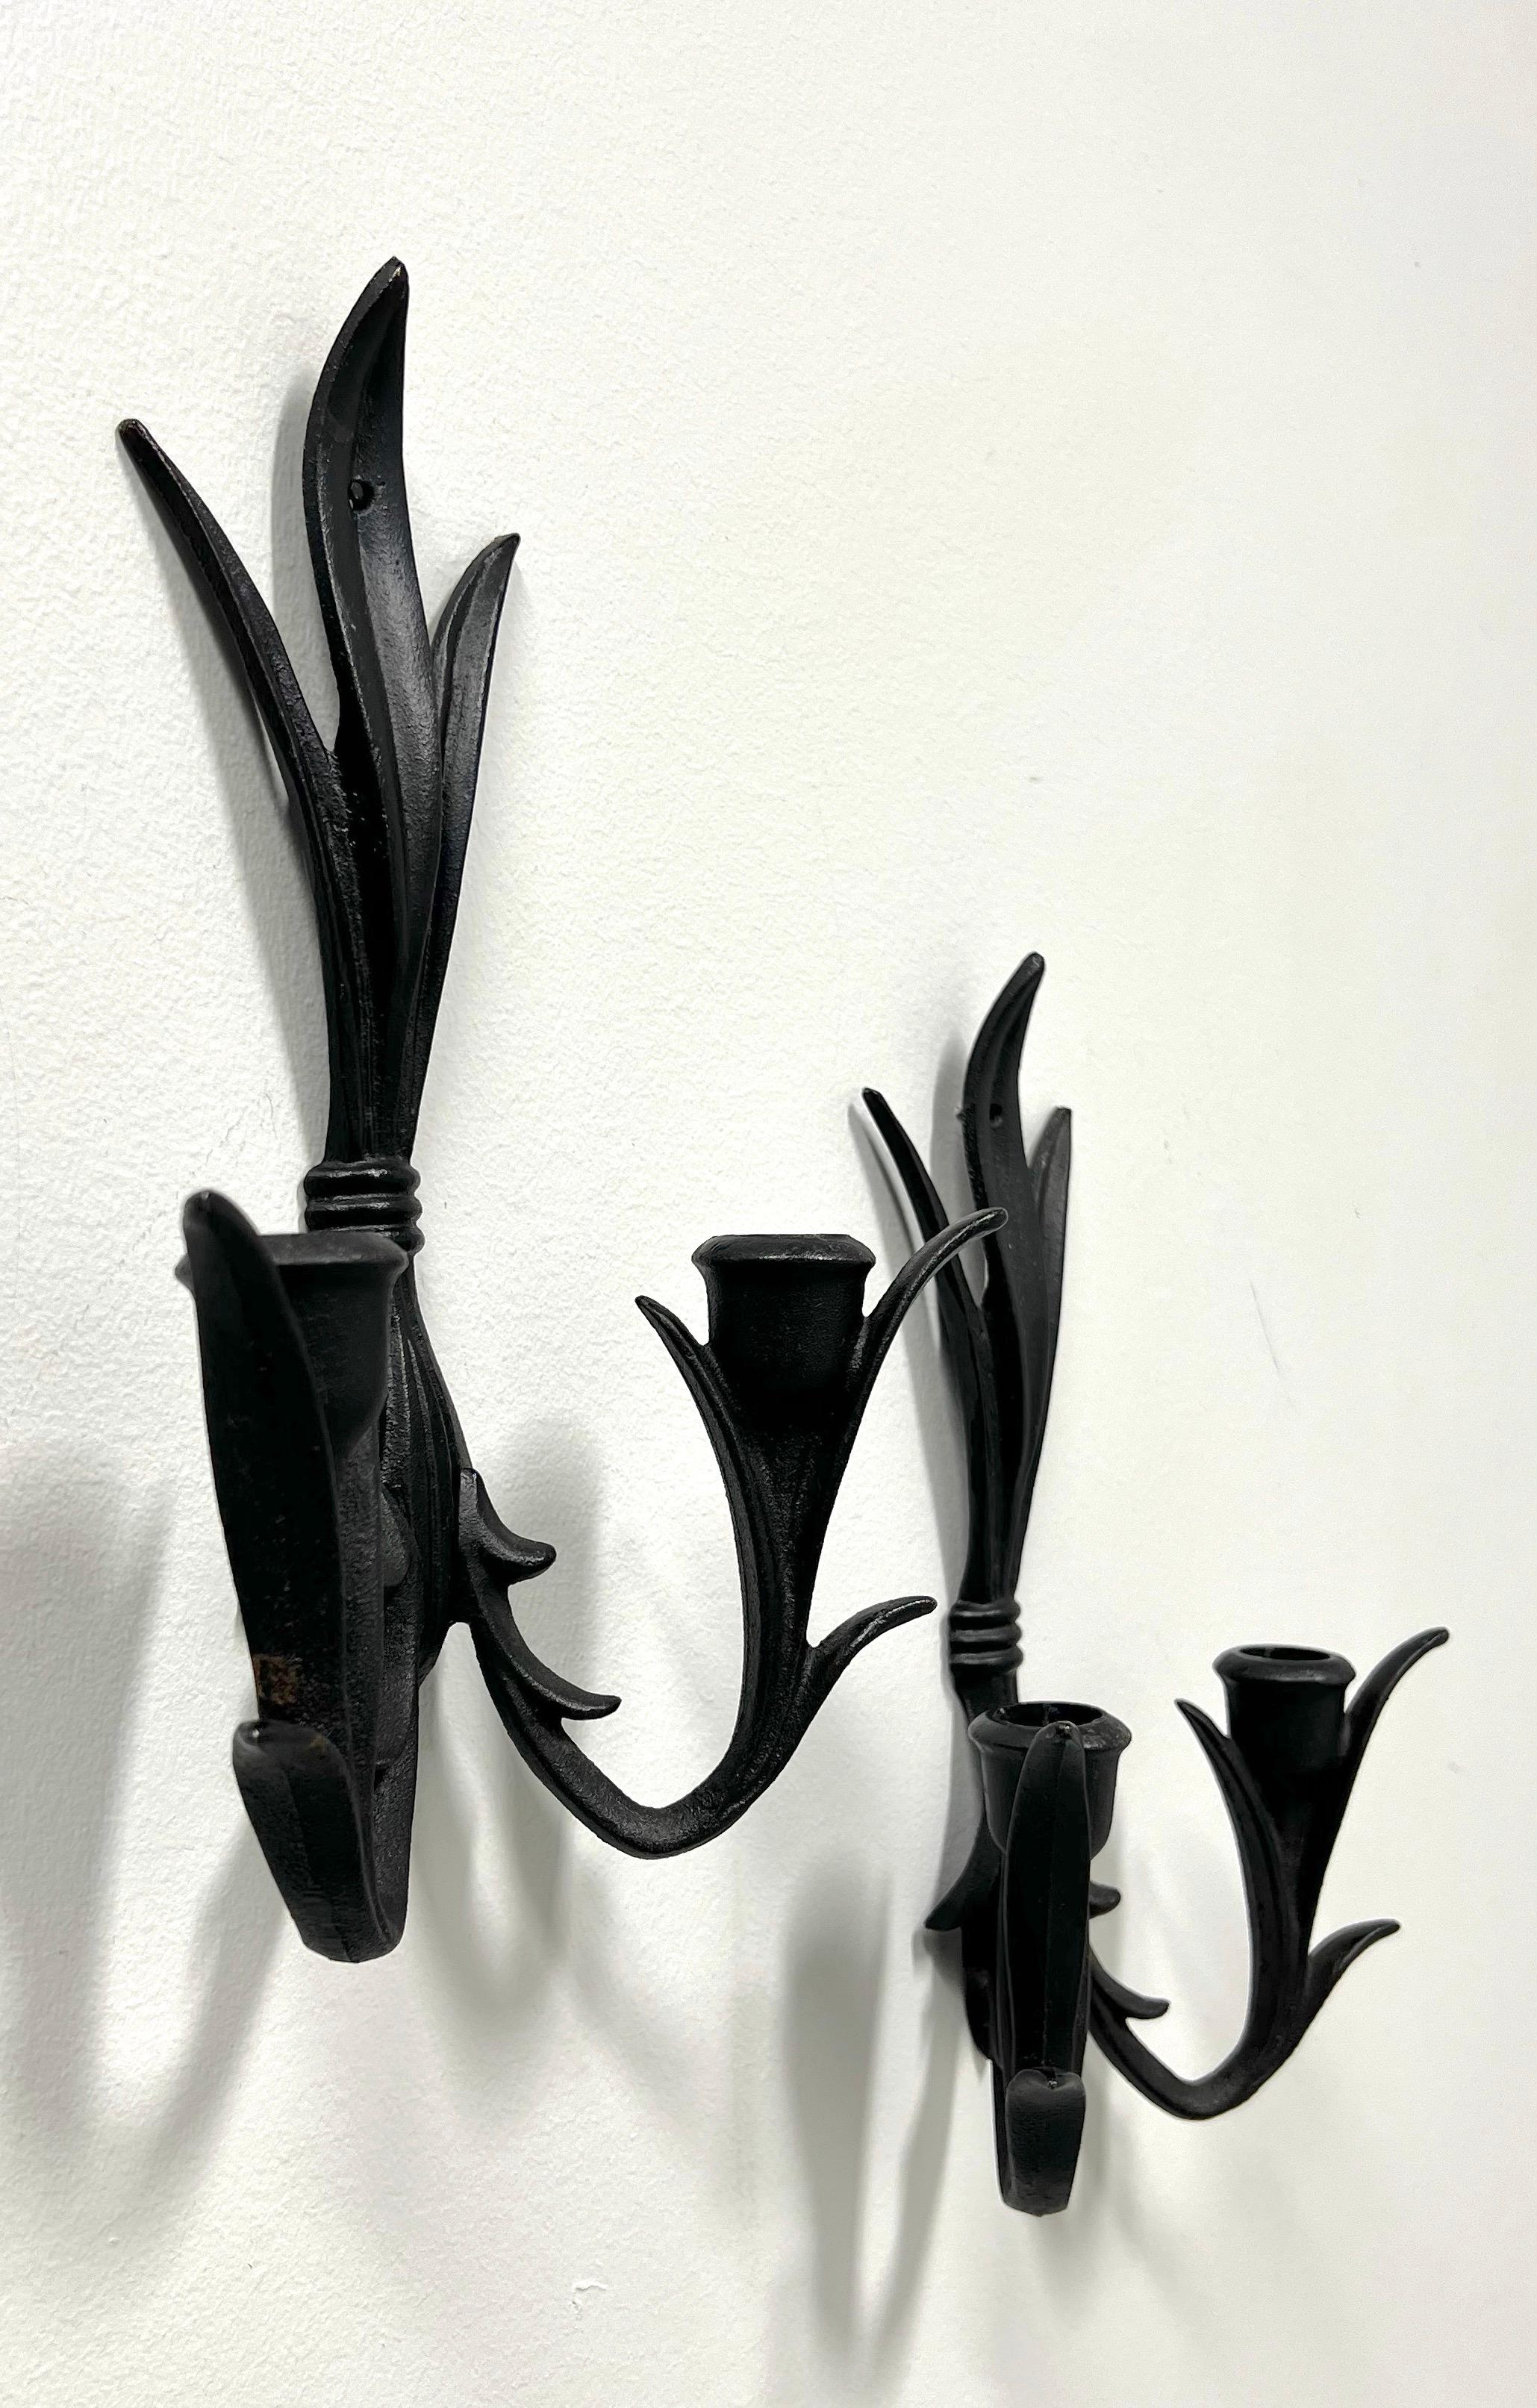 A pair of Gothic style candle wall sconces by Wilton. Solid cast iron, black in color, in a gathered sheaf of leaves design, with two arms and candleholders. Made in the USA, in the mid-20th Century.

Measures:  7w 3d 12h, Weighs Approximately: 2